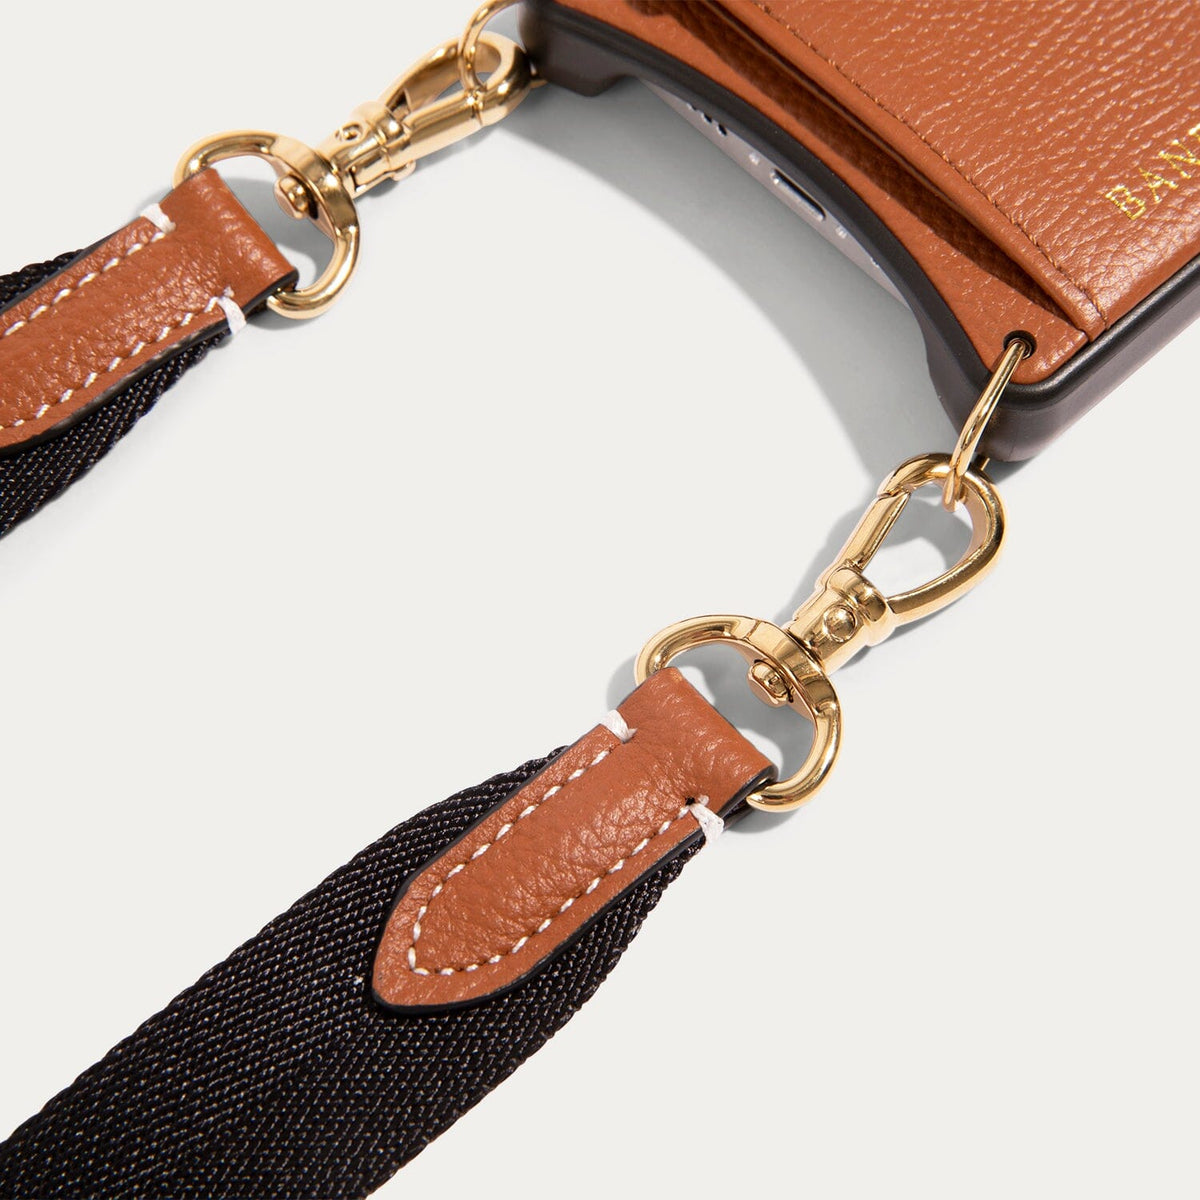 CROSSBODY STRAP REPLACEMENT